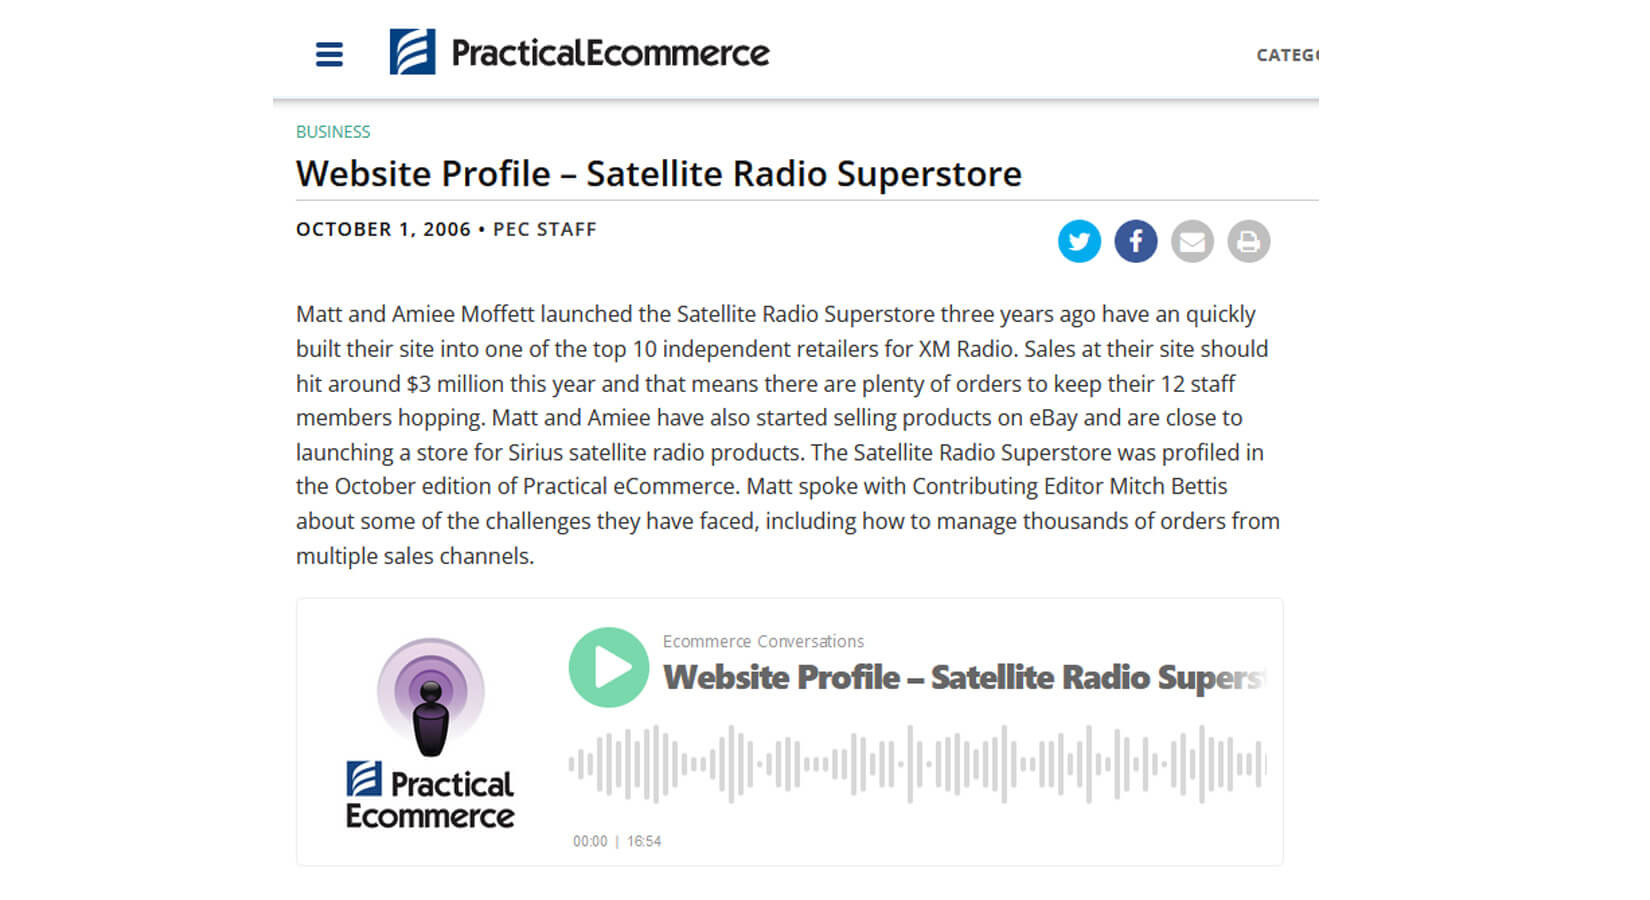 Satellite Radio Superstore Practical eCommerce Podcast Interview